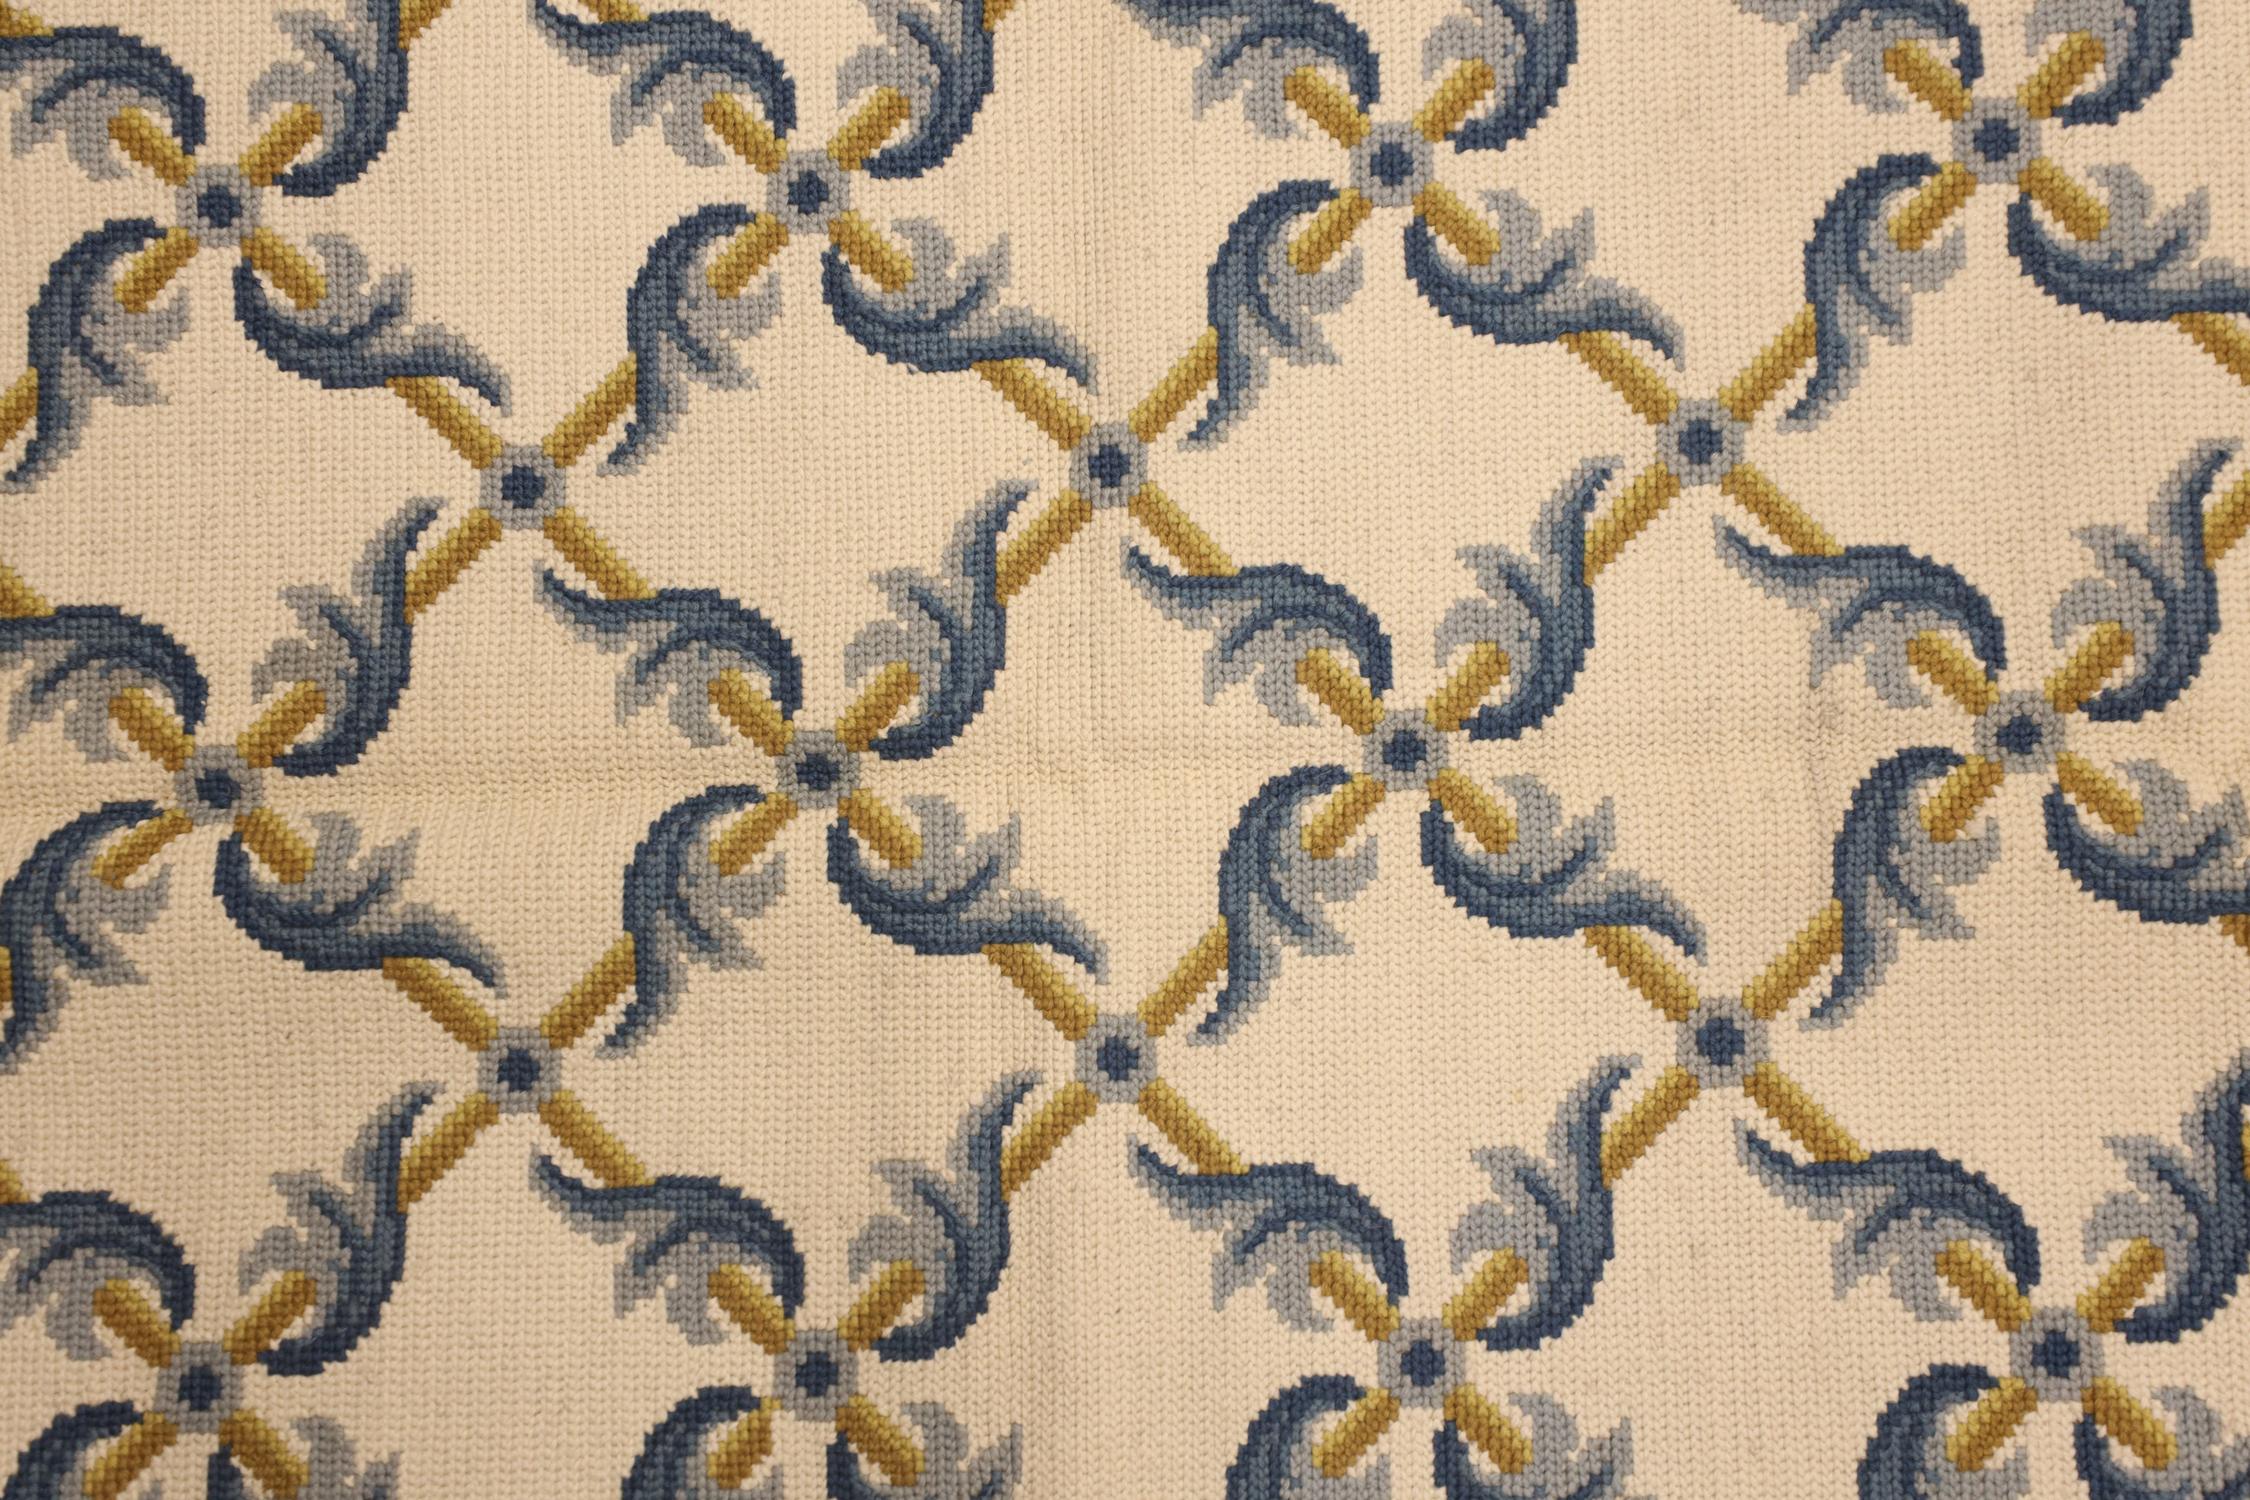 This elegant wool needlepoint is a classic example of a modern Portuguese style rug woven by hand in China in the early 21st century. The design in this piece has been delicately woven with a symmetrical pattern made up of blue and mustard accents